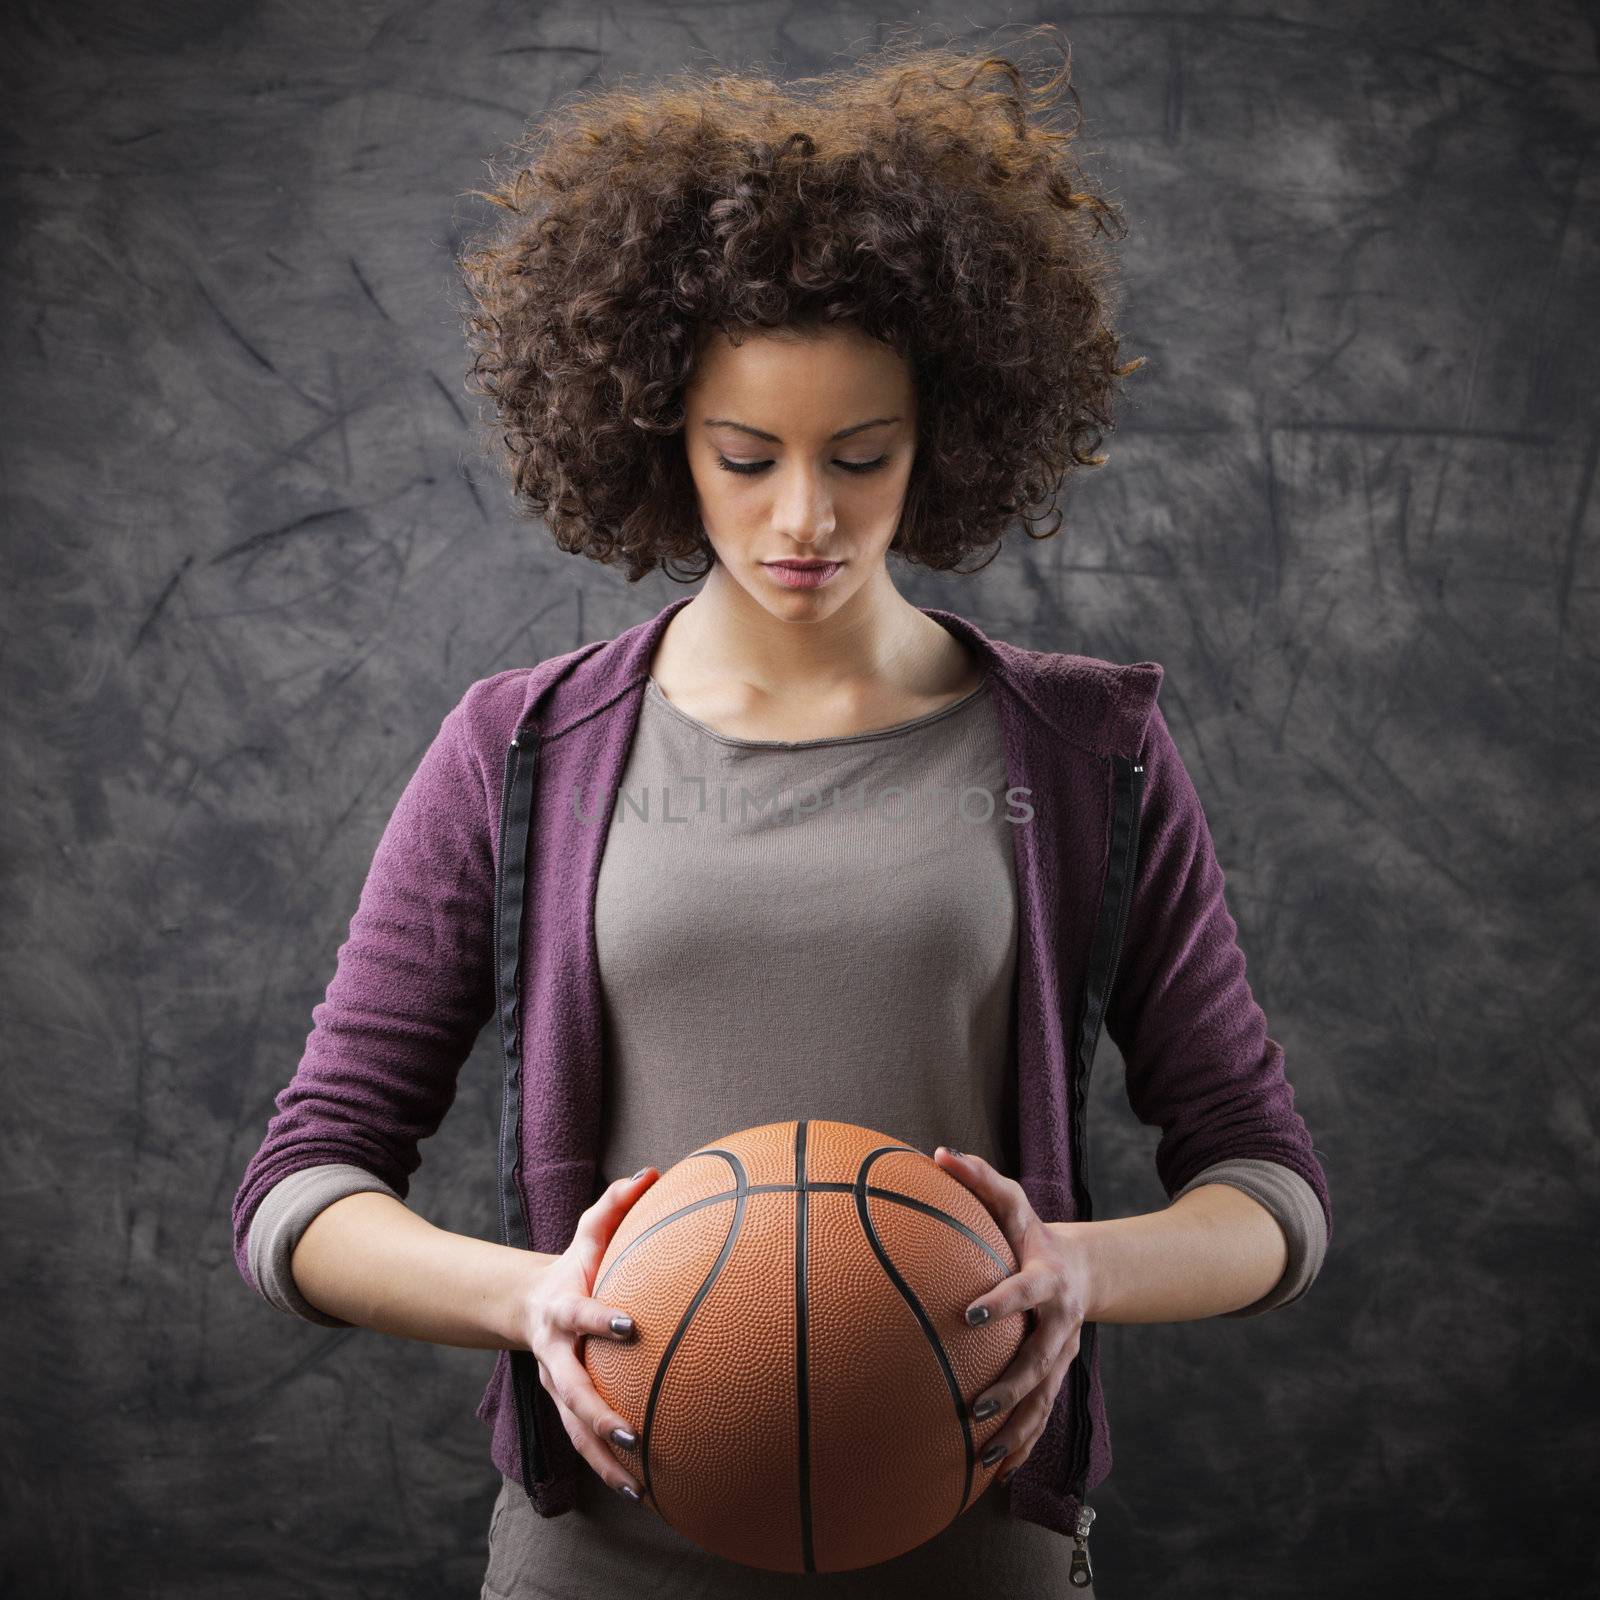 Female basketball player by stokkete